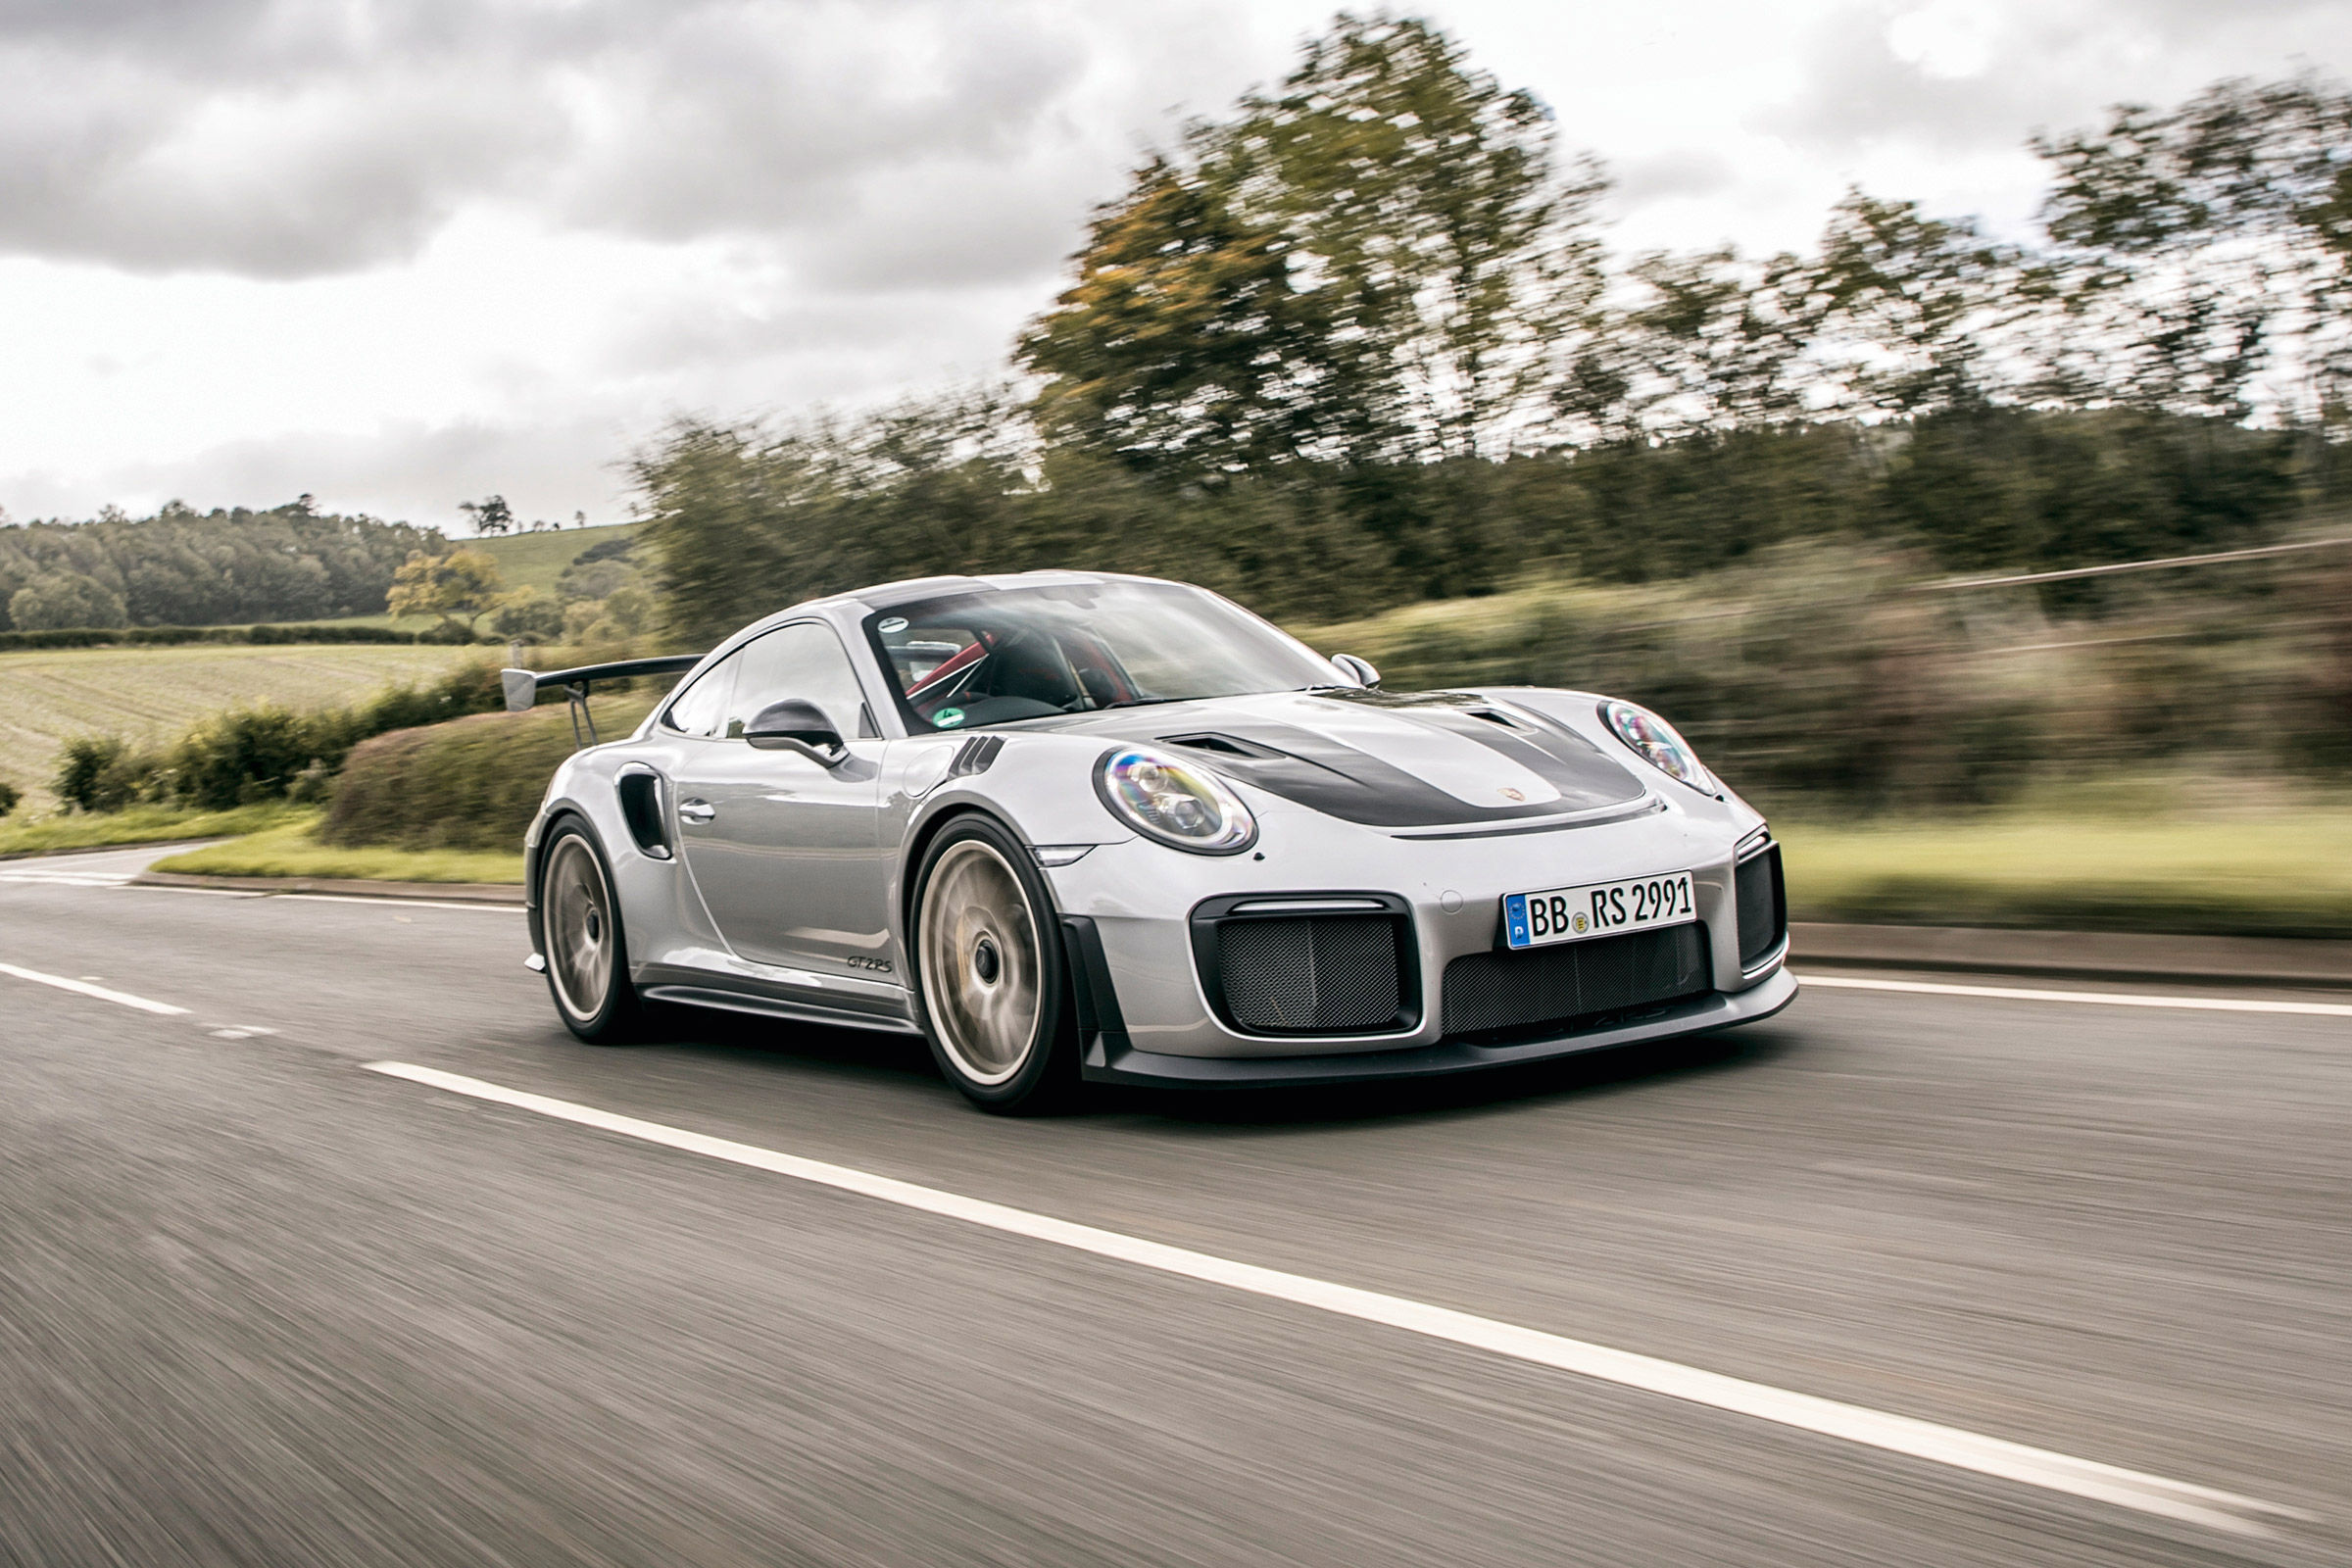 9912 Porsche 911 Gt2 Rs Review Monstrous Performance Drives 911 To A